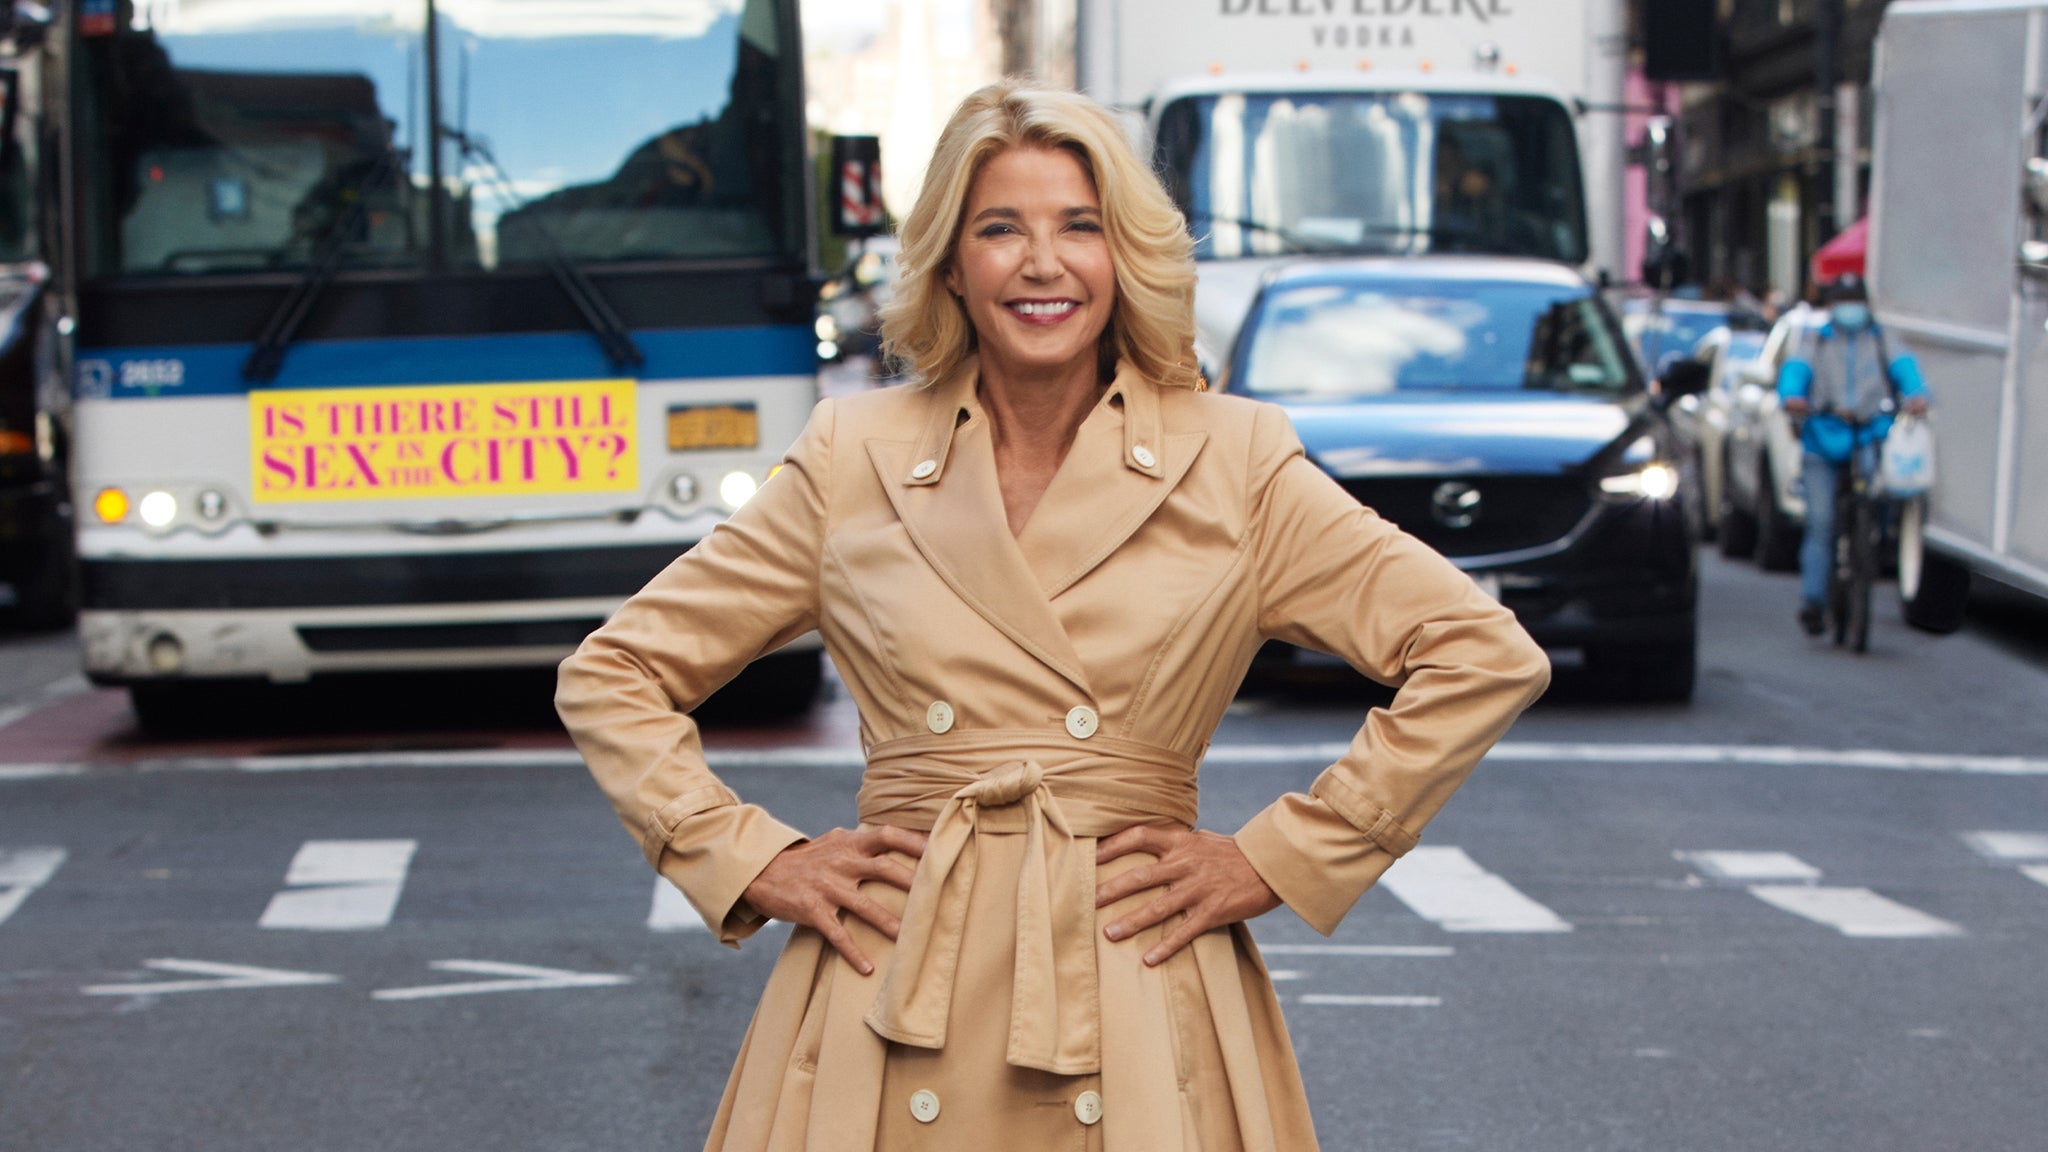 Candace Bushnell: Is There Still Sex in the City? presale code for show tickets in Prior Lake, MN (Mystic Lake Casino Hotel)